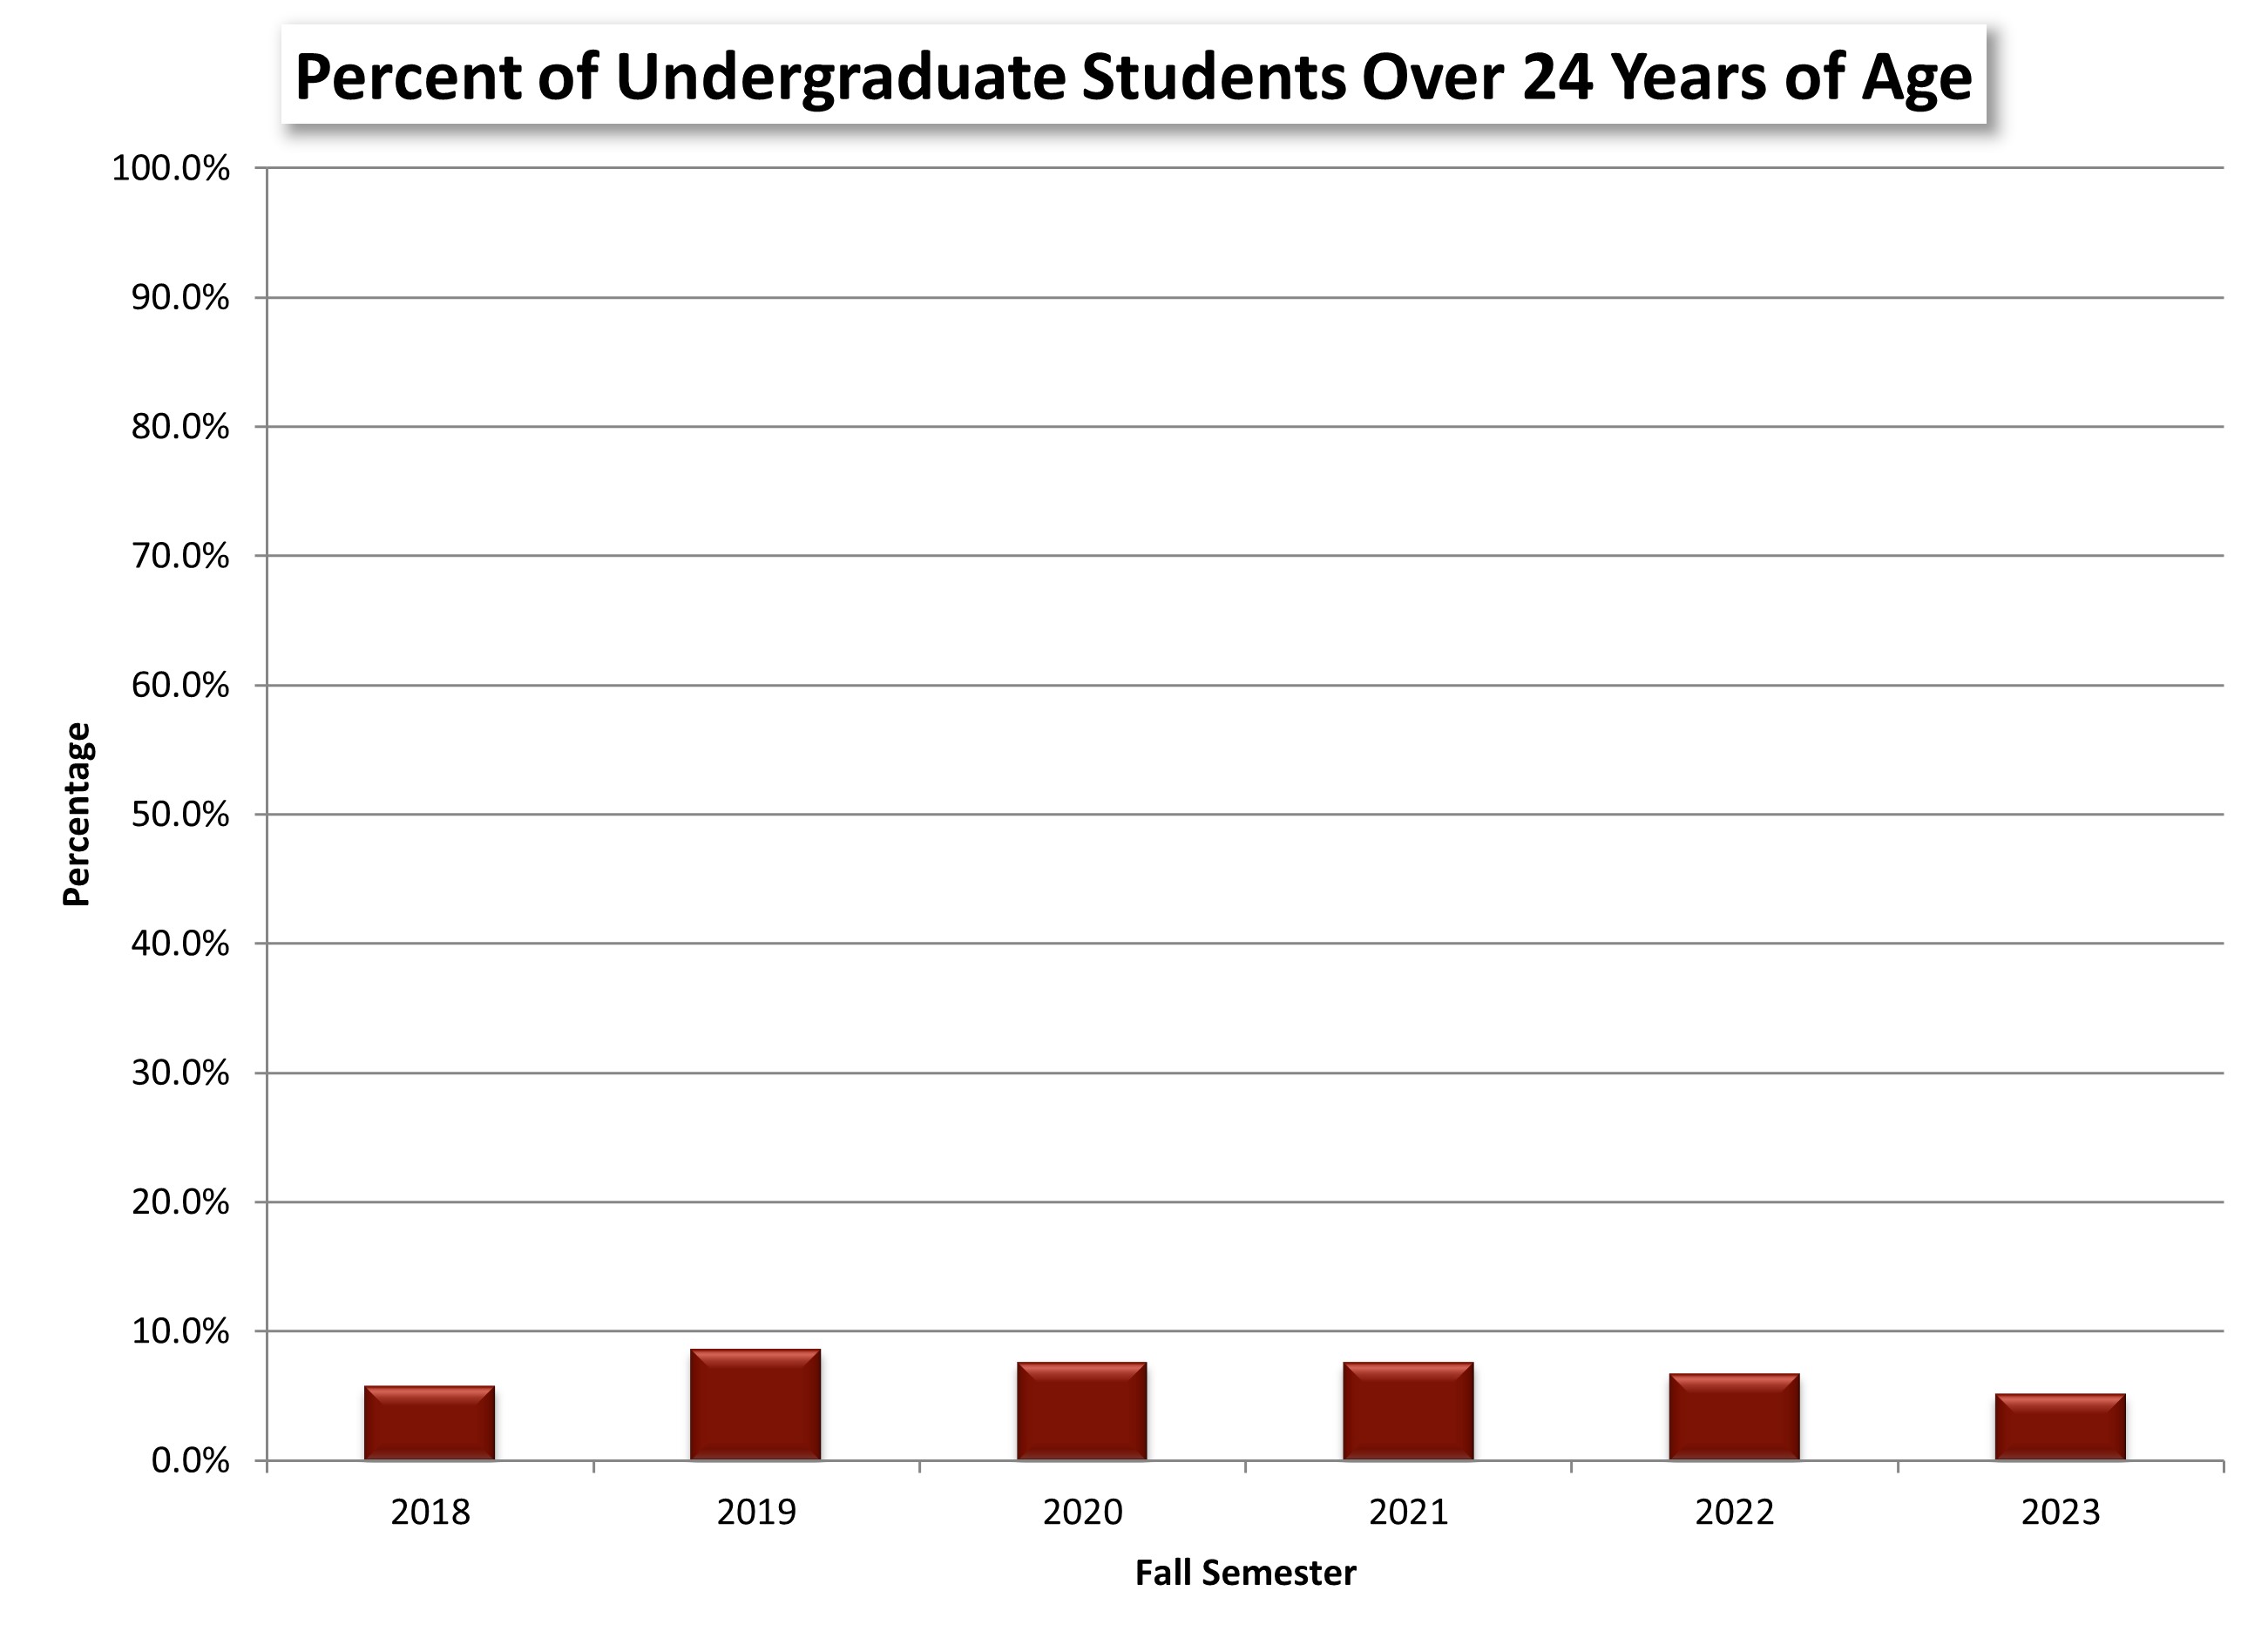 Percent of Undergraduate Students Over 24 Year of Age chart